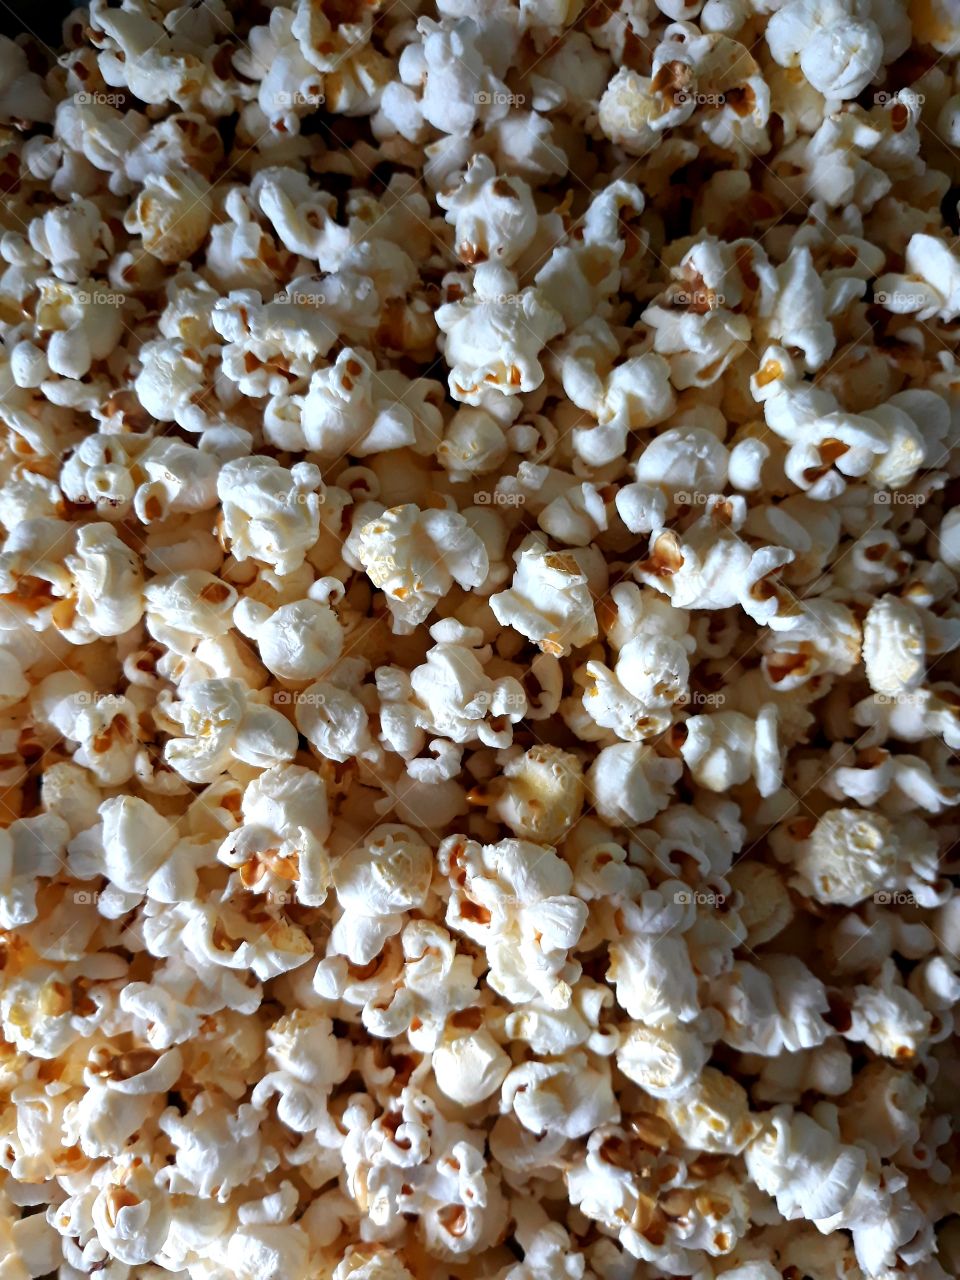 Popcorn! Who doesn't like the smell of popcorn? I like mine plain with a dash of salt.